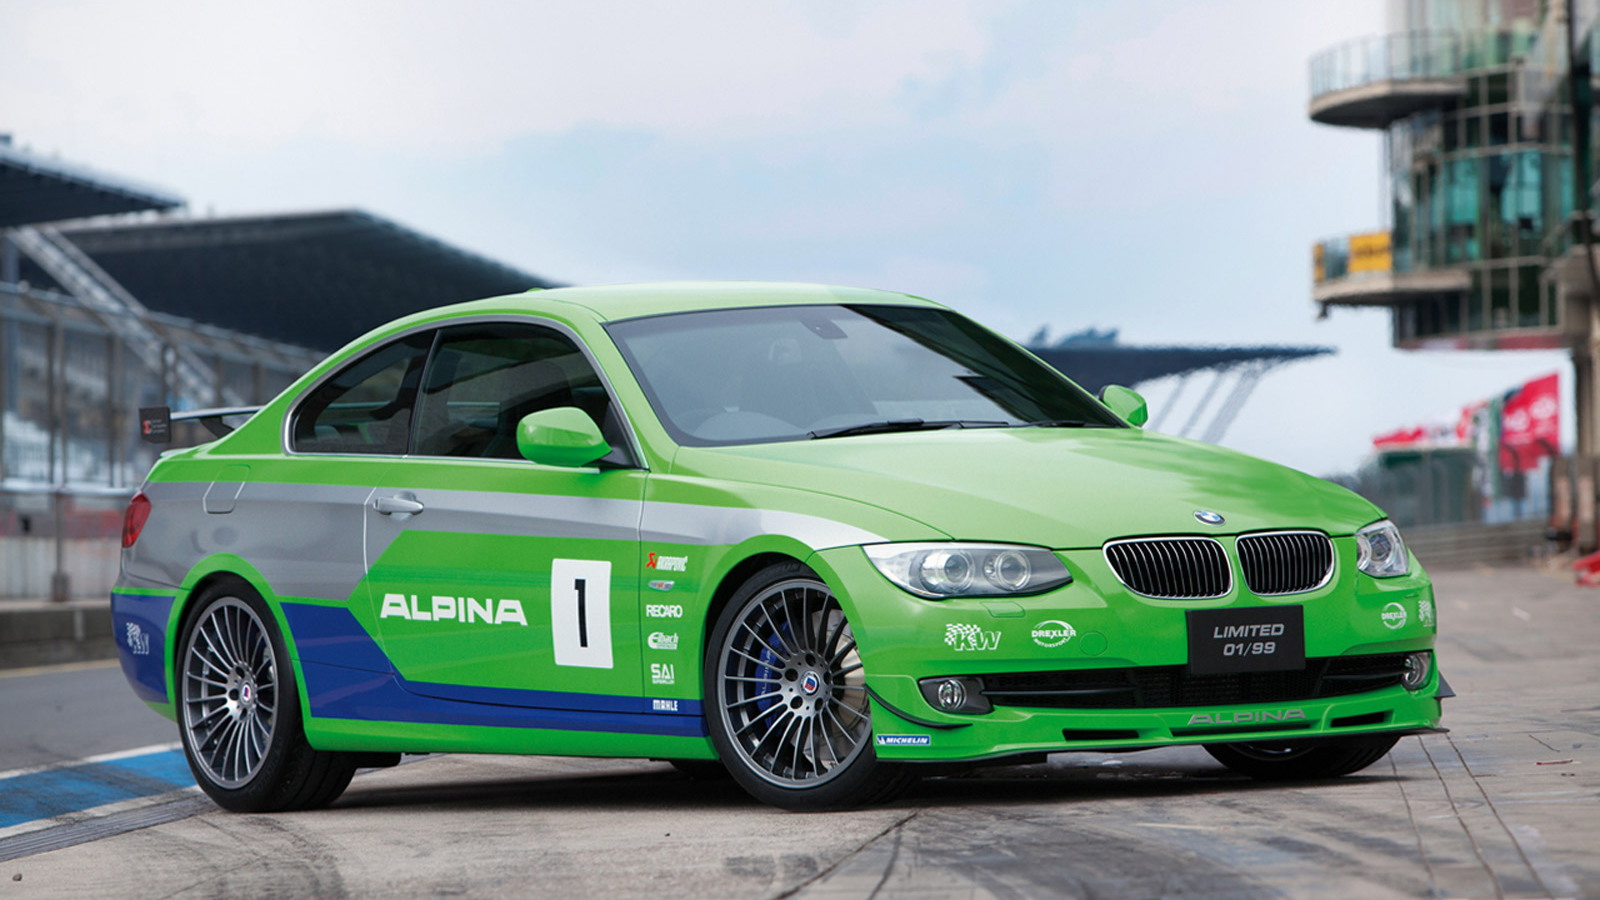 Alpina B3 GT3 based on the BMW 3-Series Coupe